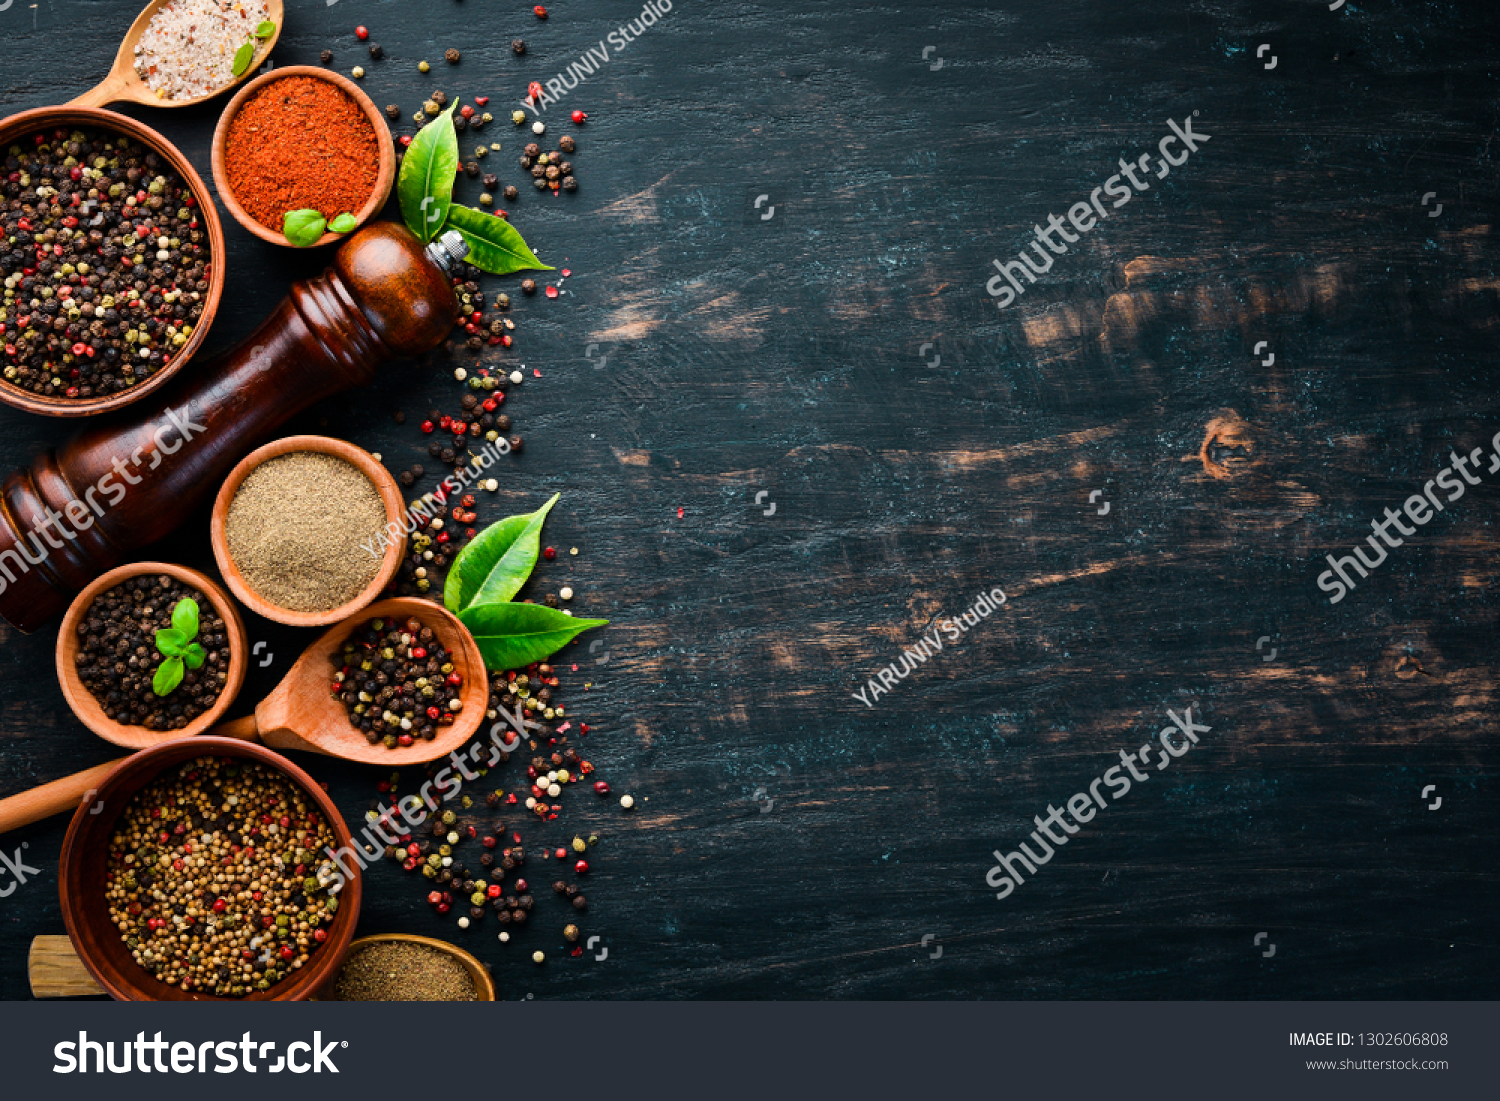 A set of peppers. Black pepper, colored pepper, ground pepper, dried chili pepper. Top view. On a black background. free space for your text. #1302606808